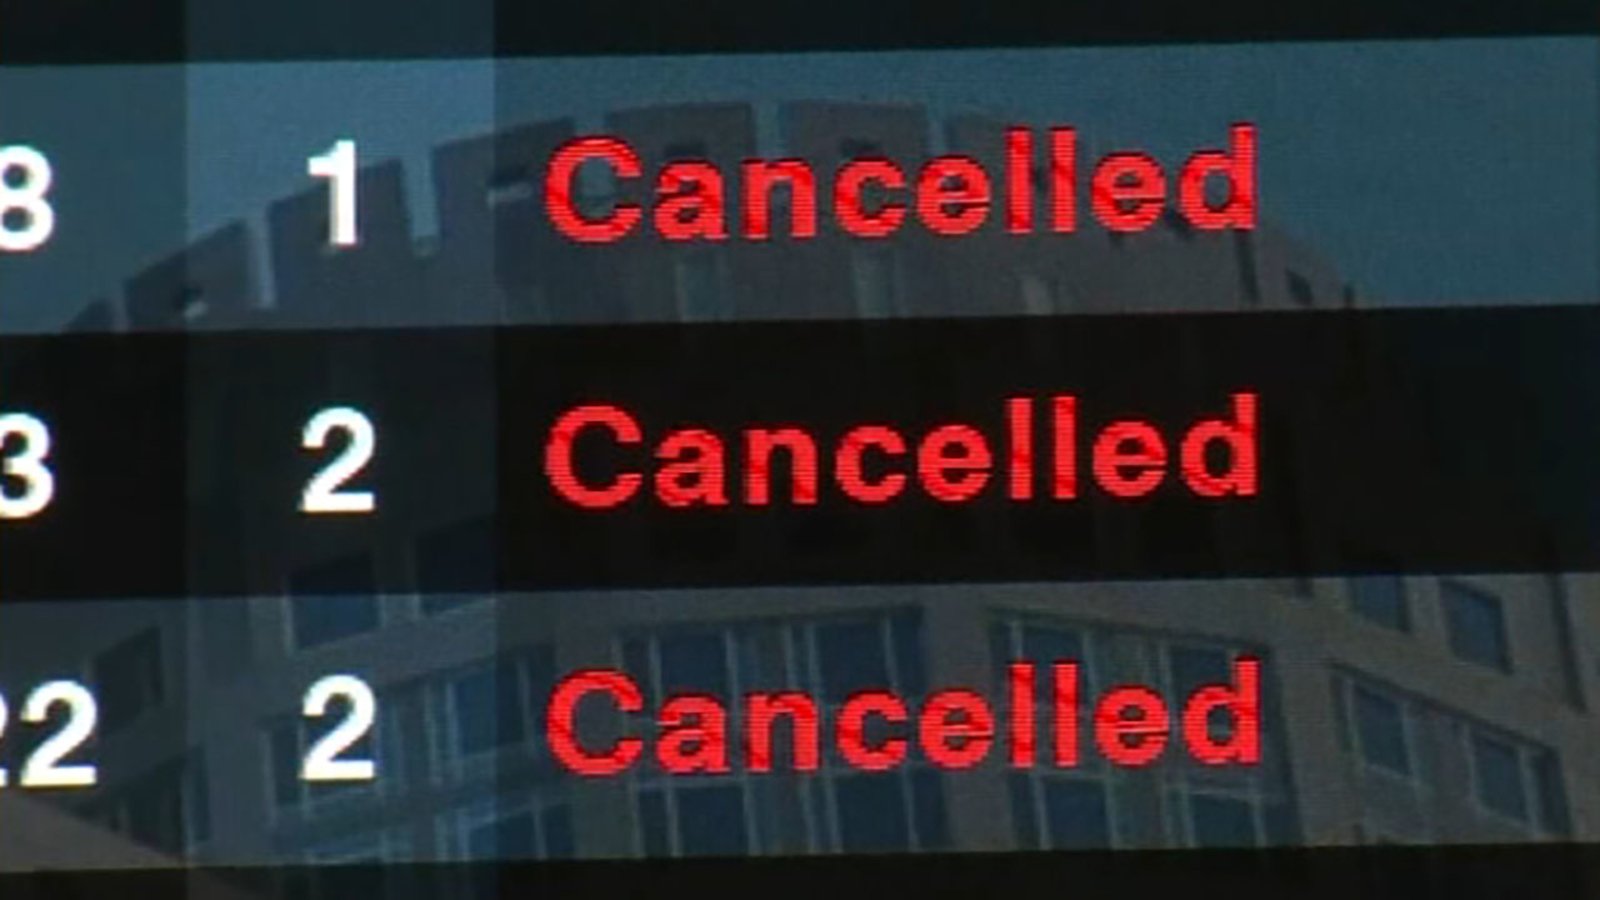 harry-reid-airport-delays,-cancellations-continue-during-holiday-travel